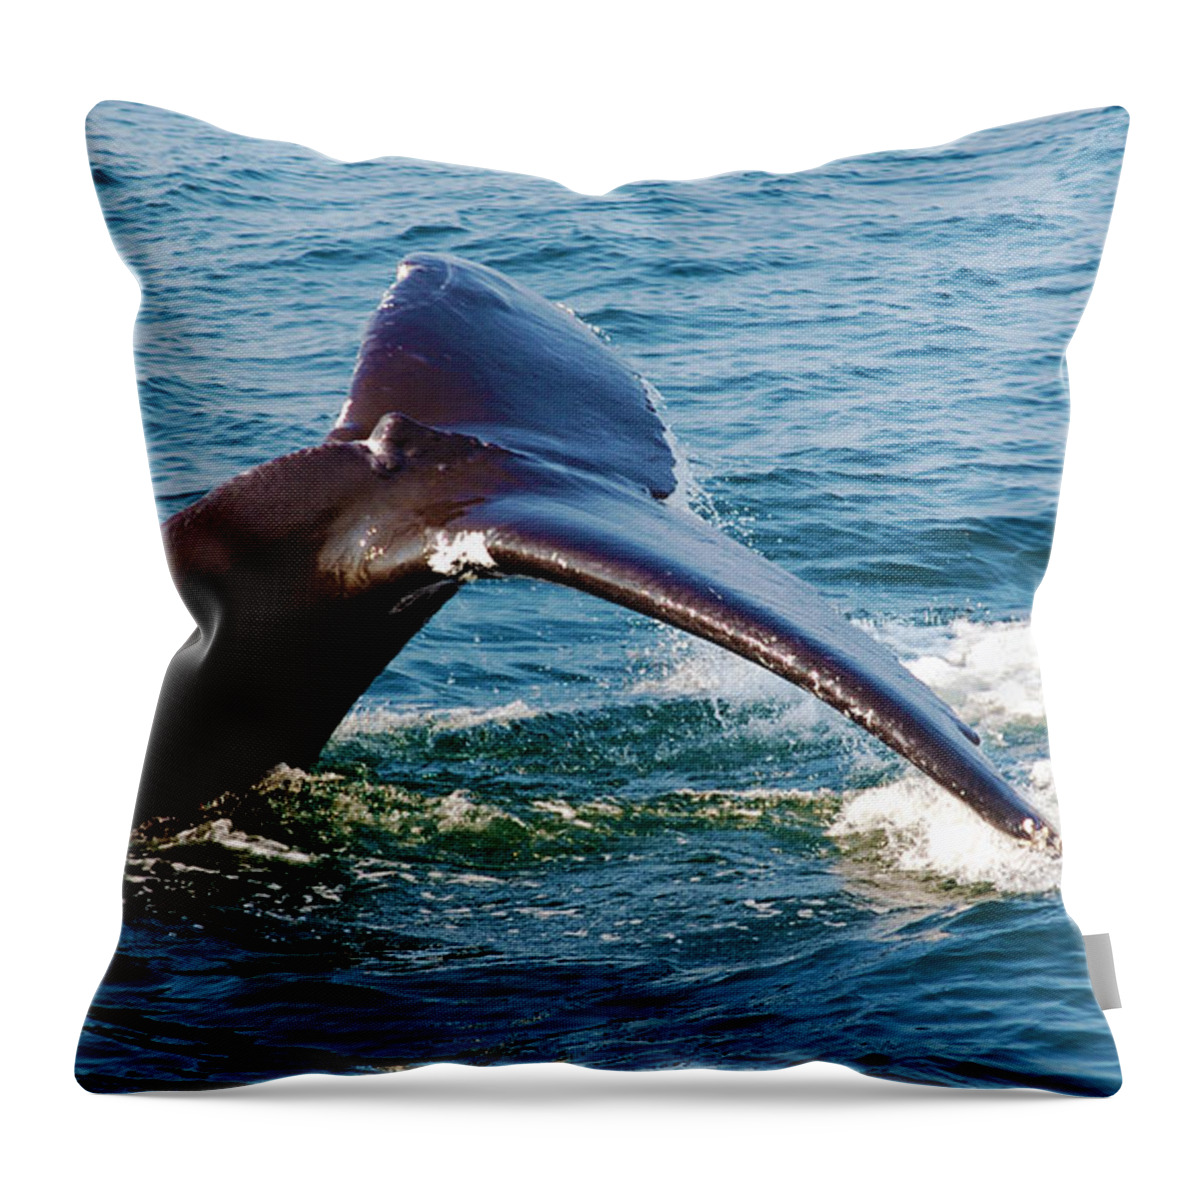 Whale Throw Pillow featuring the photograph Whale Tail by Ron Haist